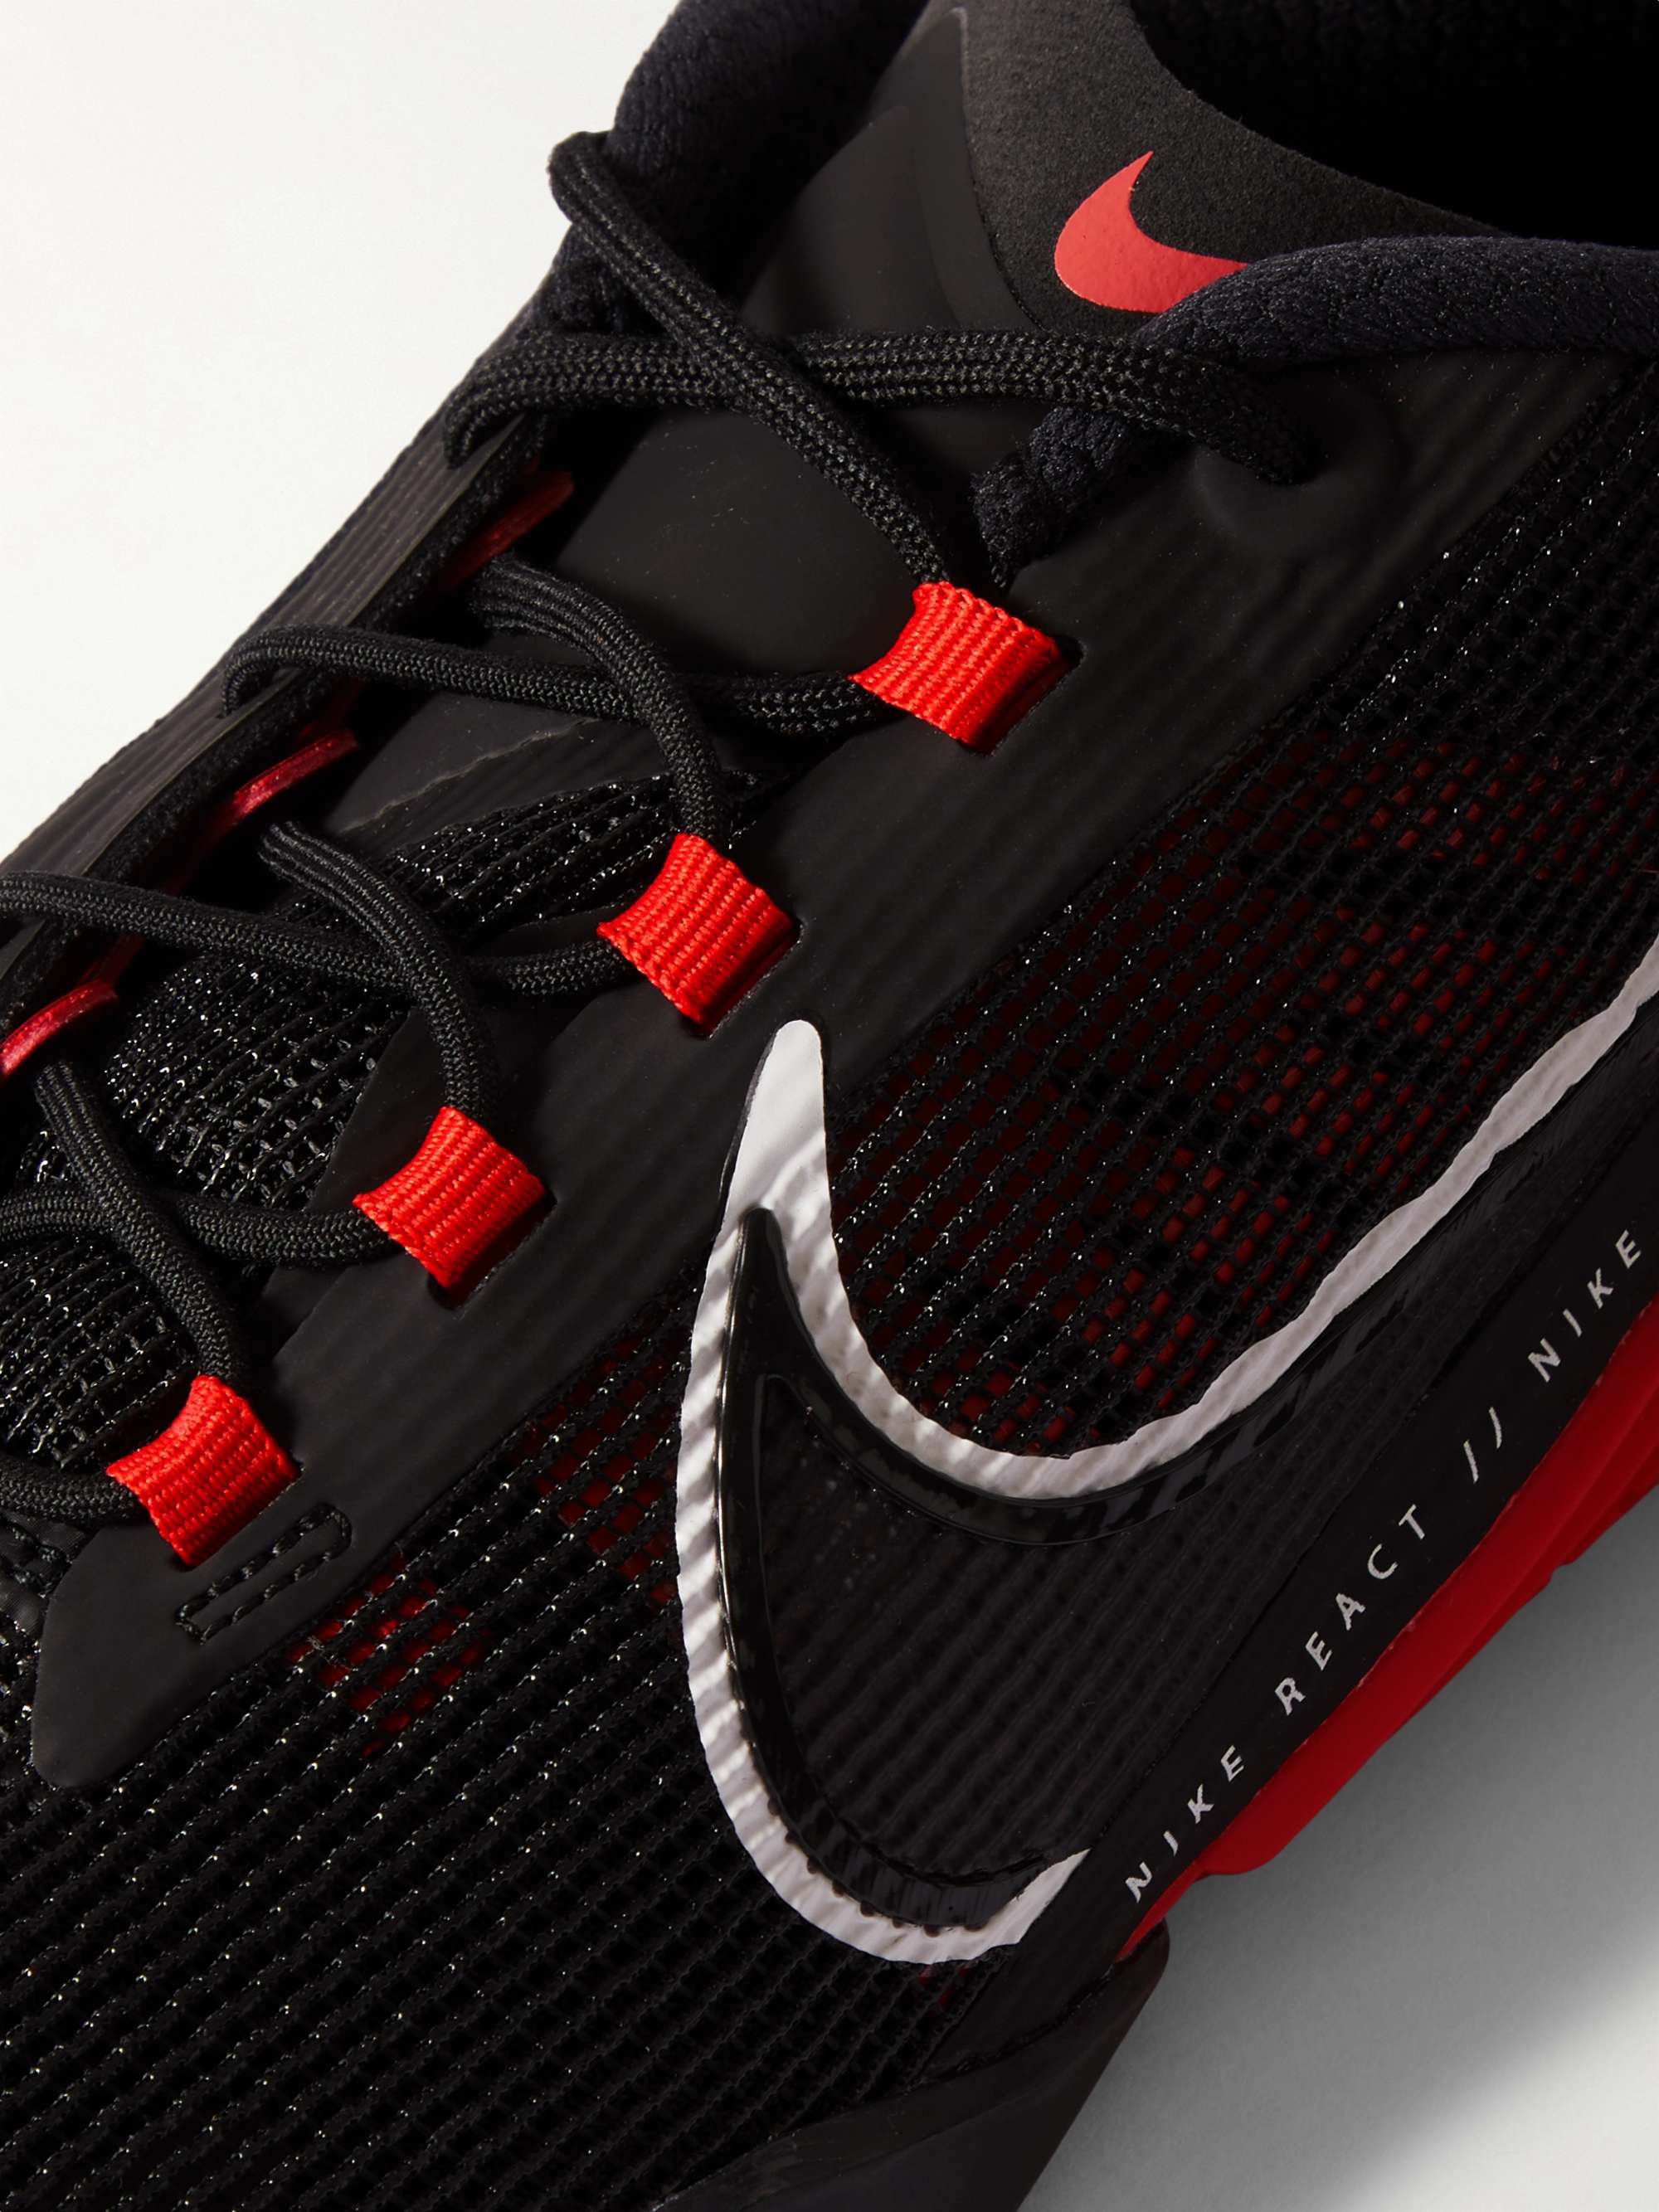 NIKE TRAINING React Metcon Turbo Rubber-Trimmed Mesh Sneakers